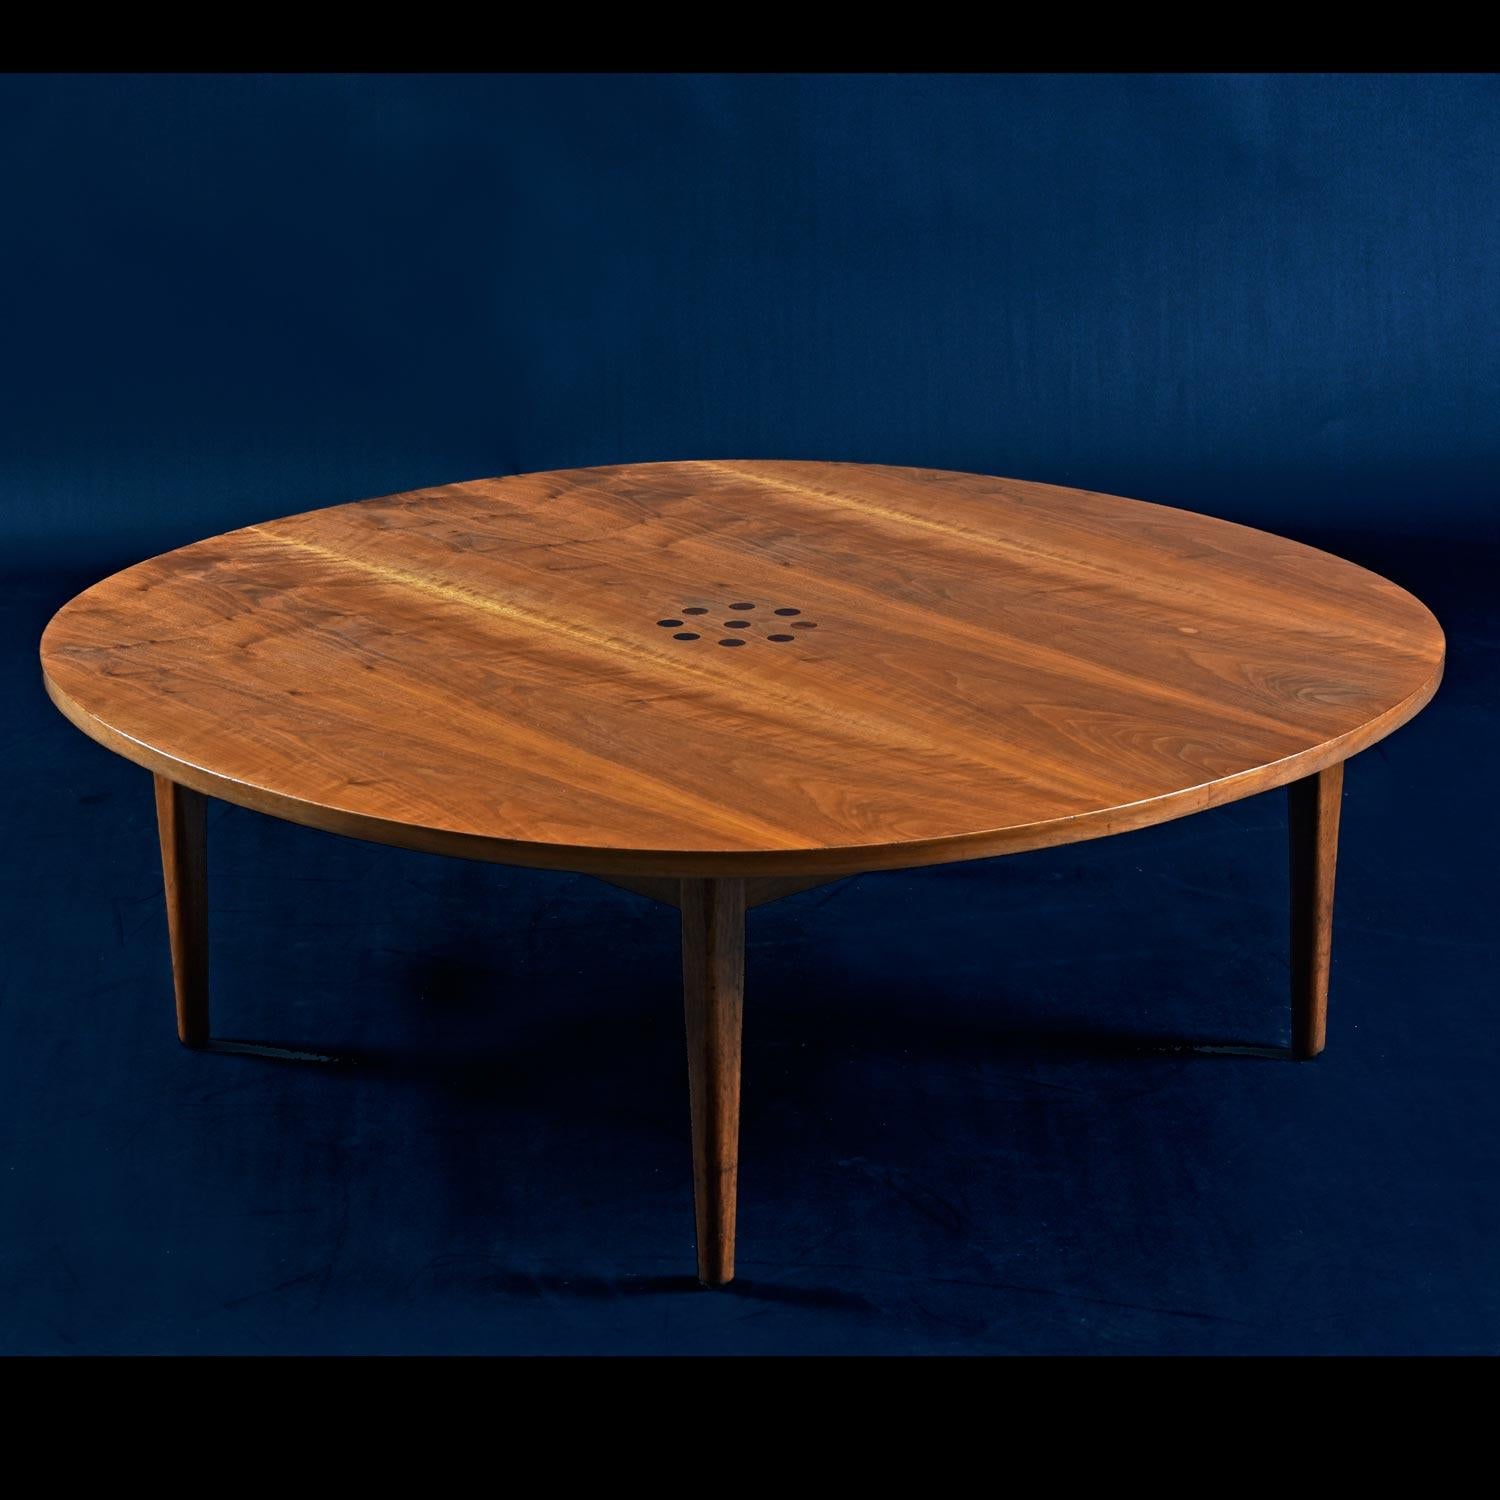 This exceptional coffee table comes to us from Kipp Stewart and Stewart MacDougall. Designed for Drexel’s esteemed and coveted “Declaration” collection. Kipp Stewart’s background in architecture is evident in the keen acuity for precision in this